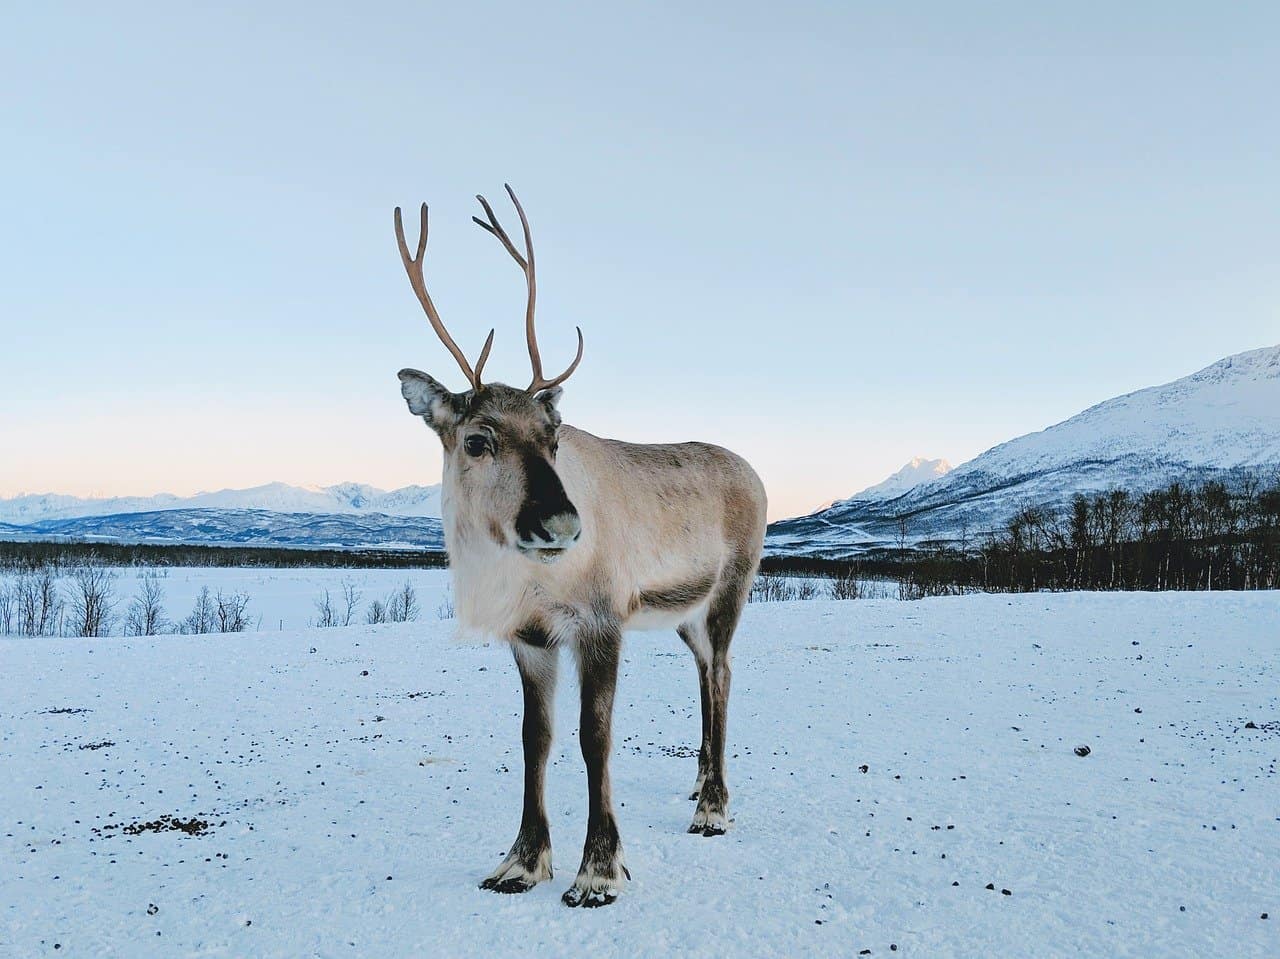 40 Reindeer Facts More Than Just About Rudolph - Facts.net